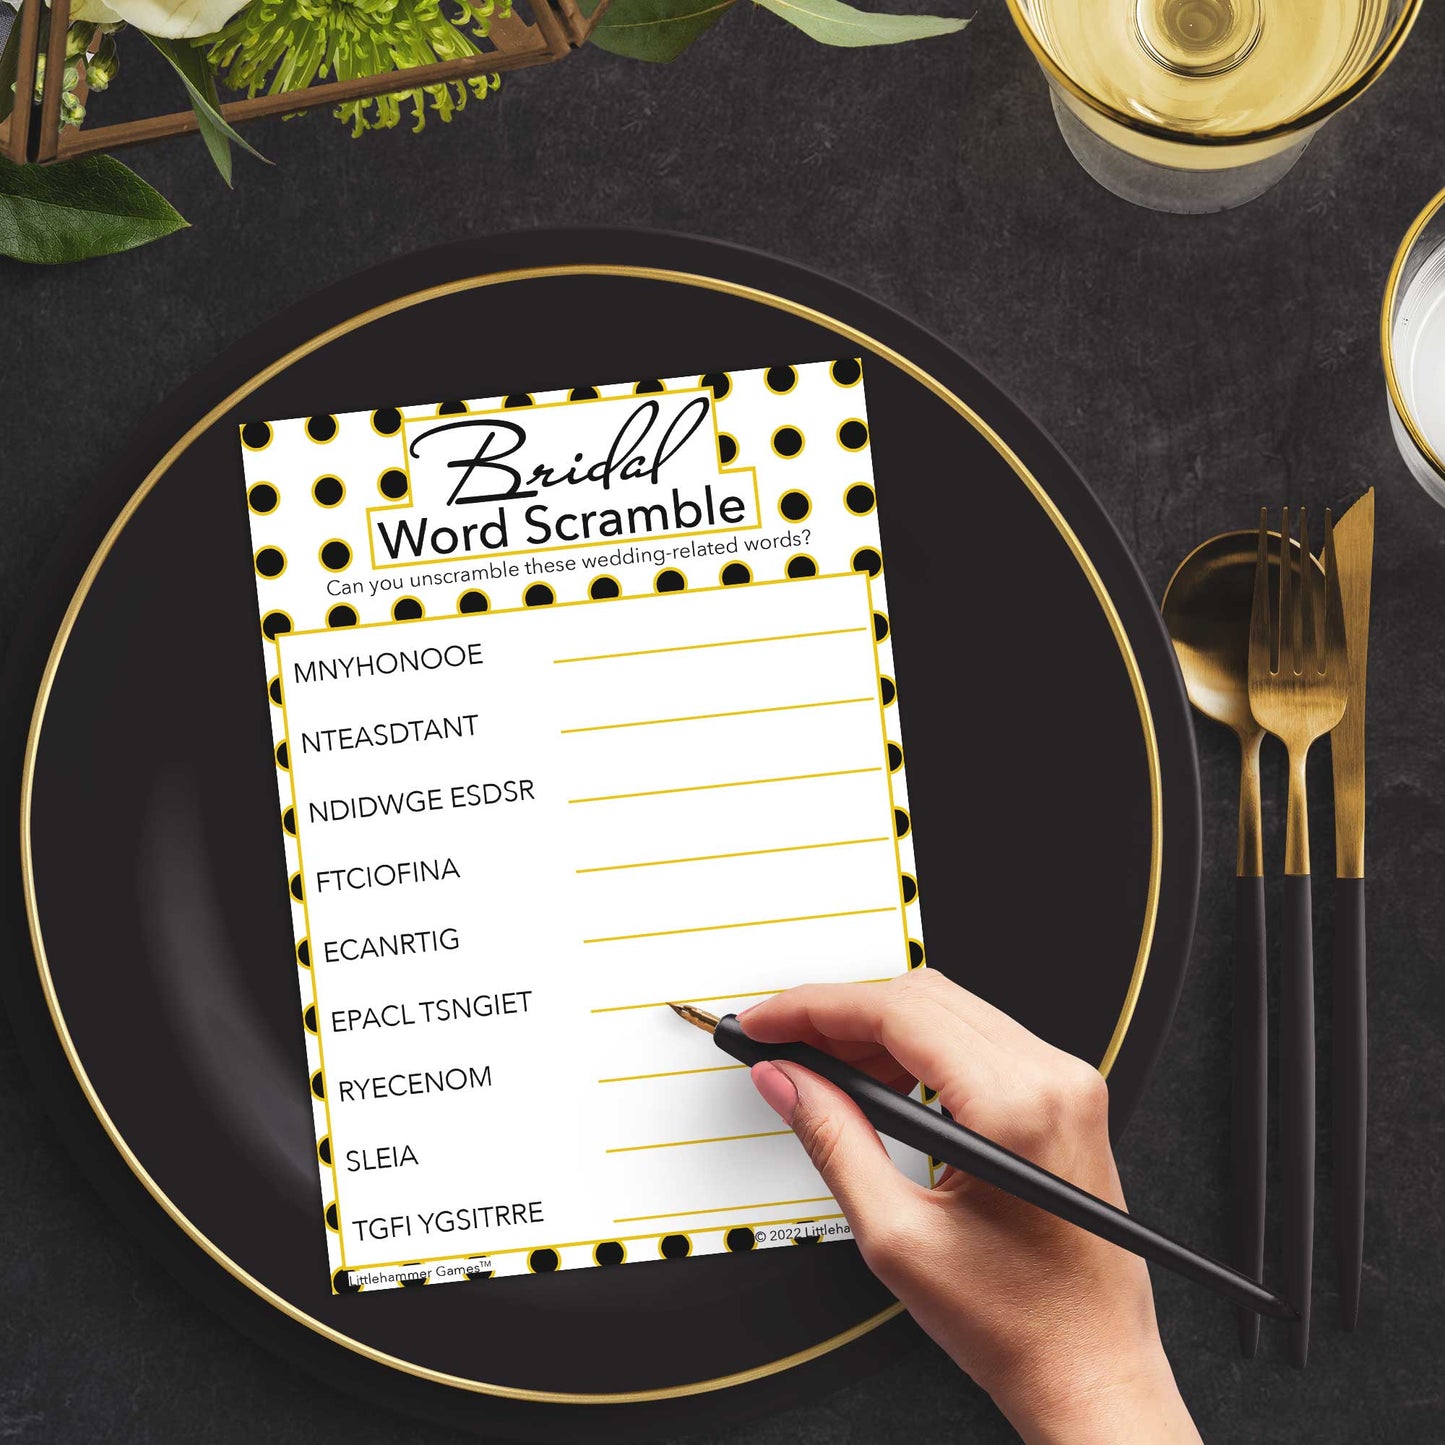 Woman with a pen playing a black and gold polka dot Bridal Word Scramble game card at a dark place setting